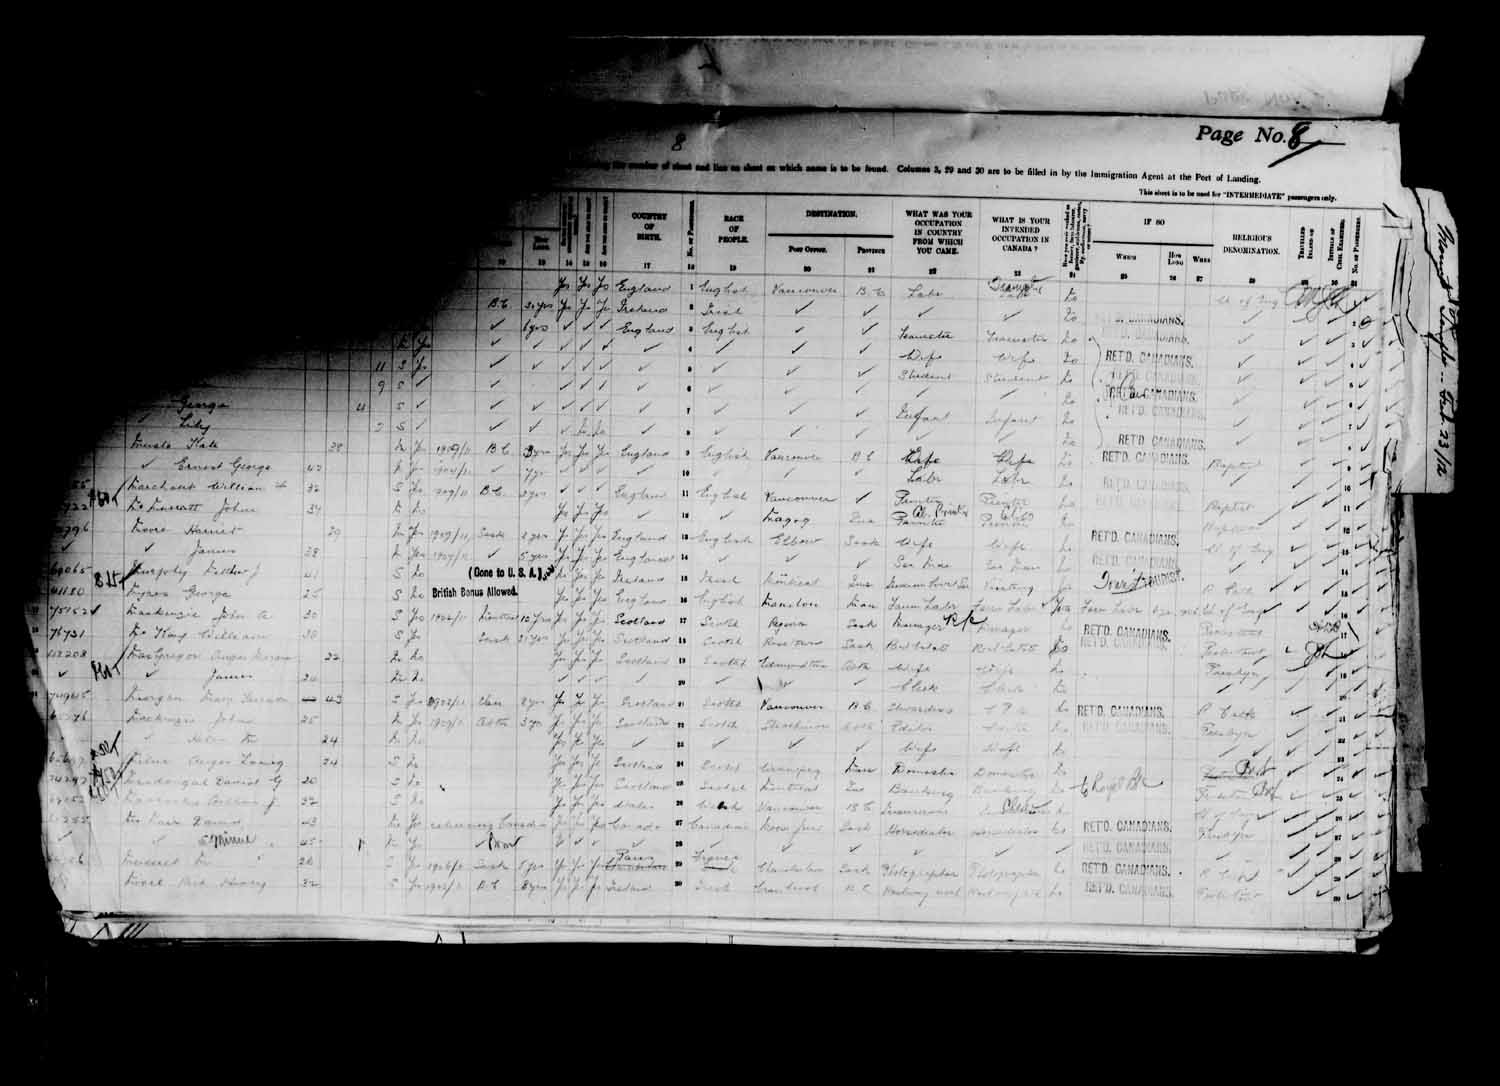 Digitized page of Passenger Lists for Image No.: e003627181